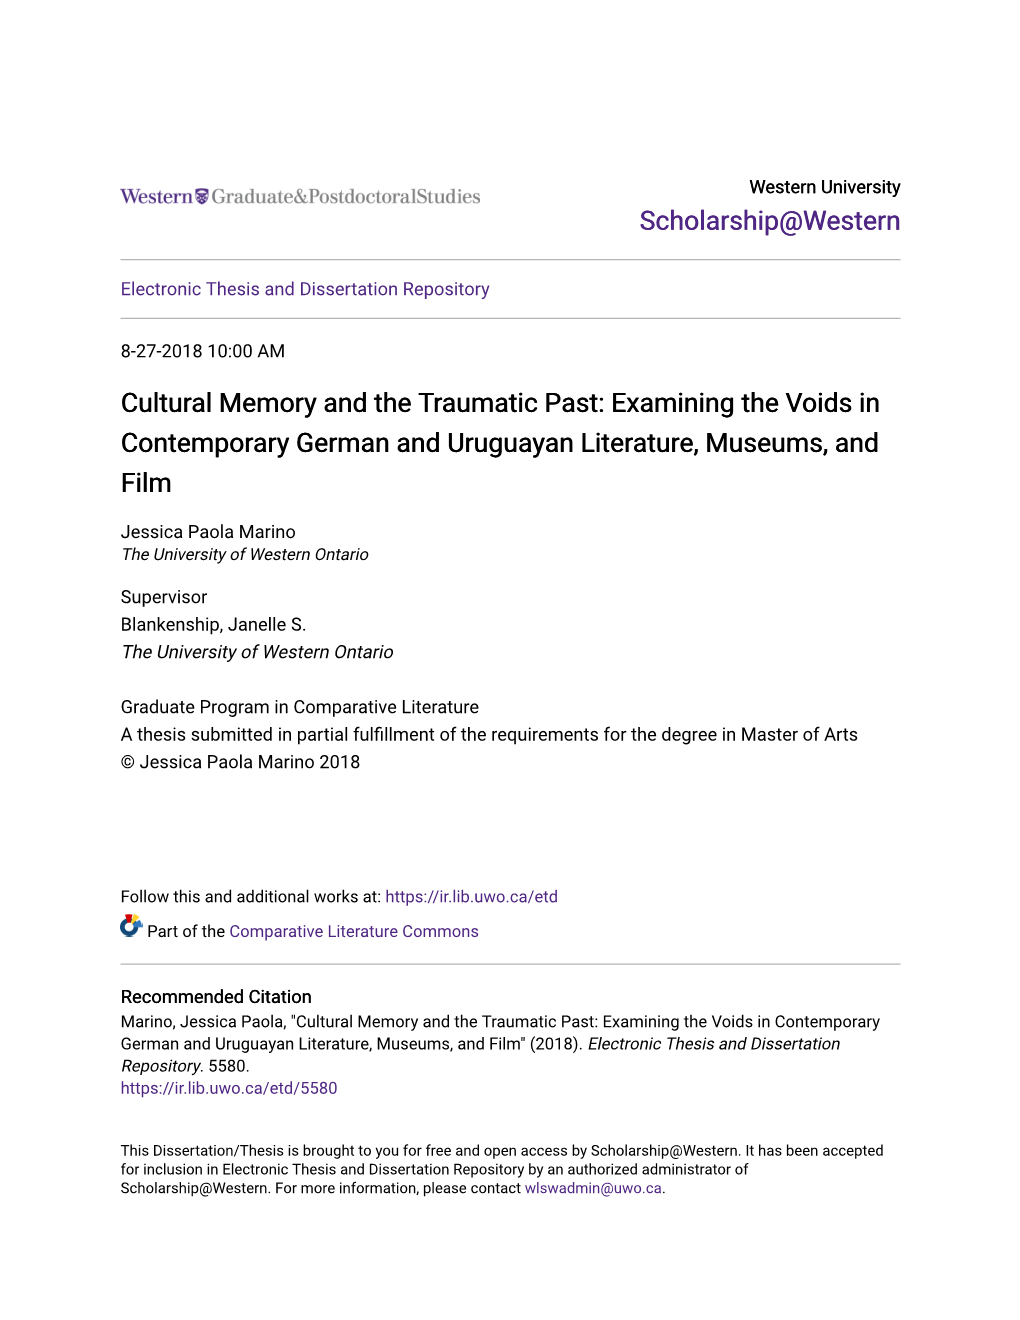 Cultural Memory and the Traumatic Past: Examining the Voids in Contemporary German and Uruguayan Literature, Museums, and Film